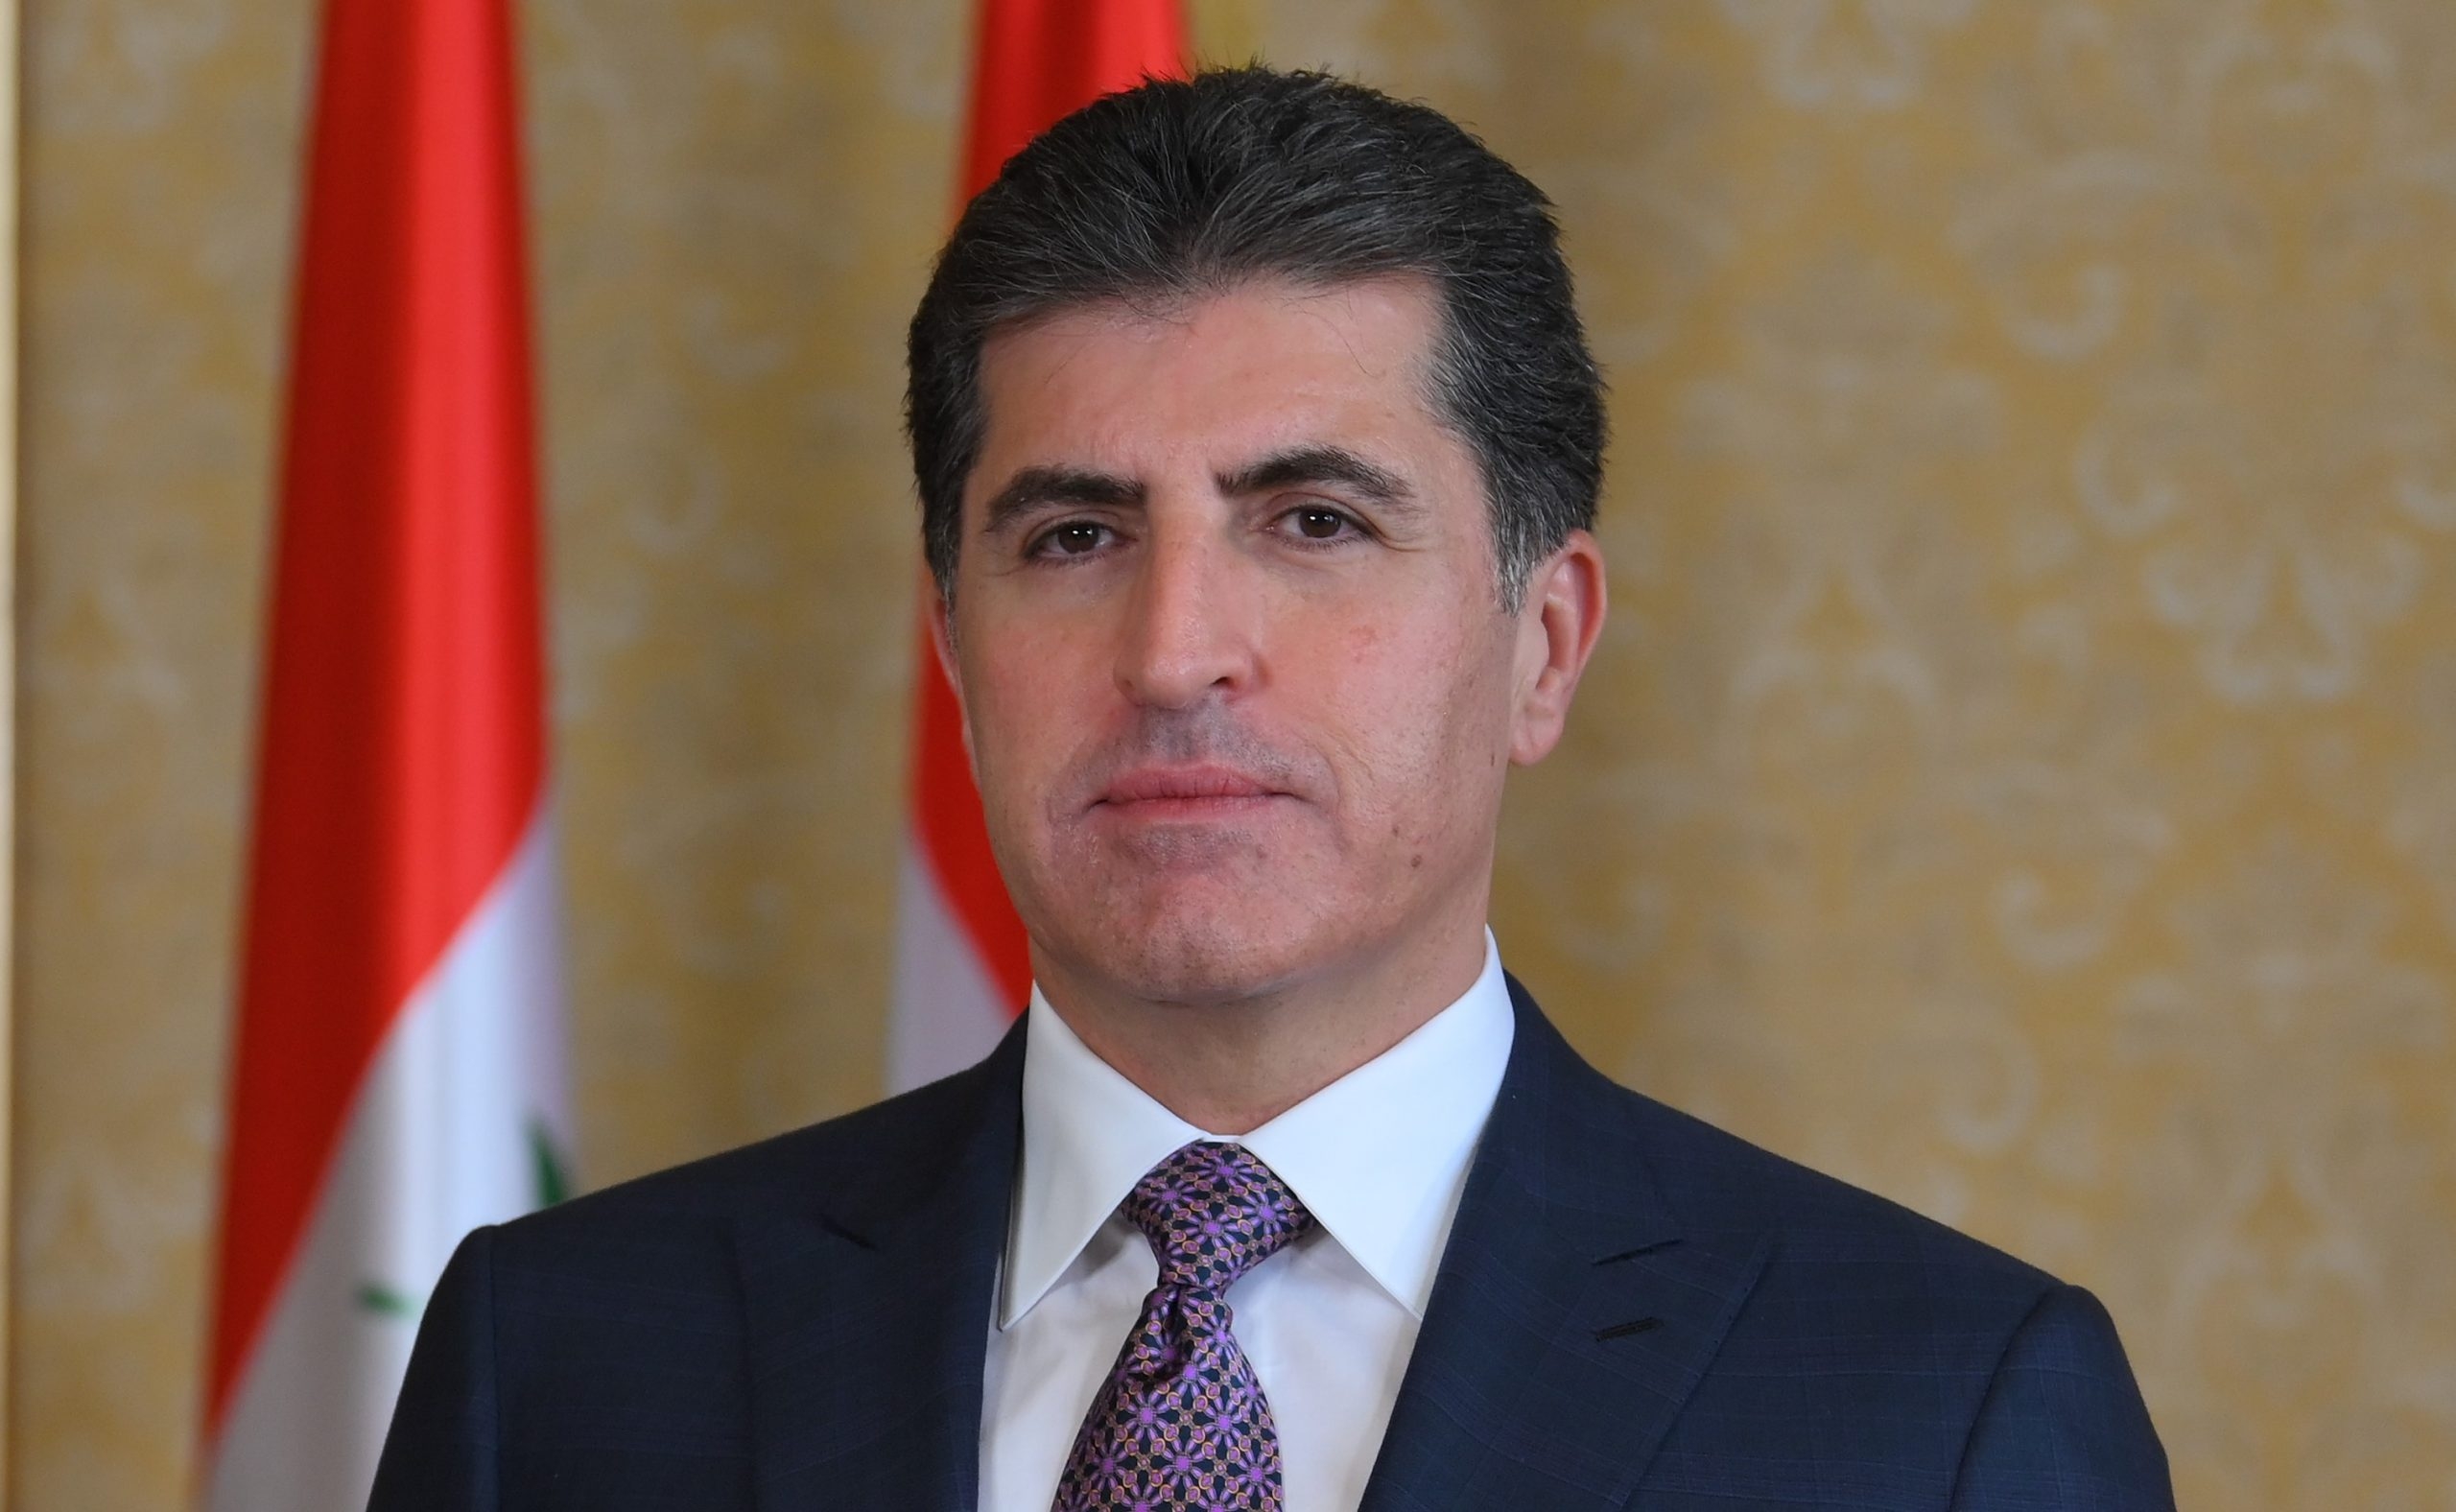 Message of condolence from the President of the Kurdistan Region on the passing of Saleh al-Qalab